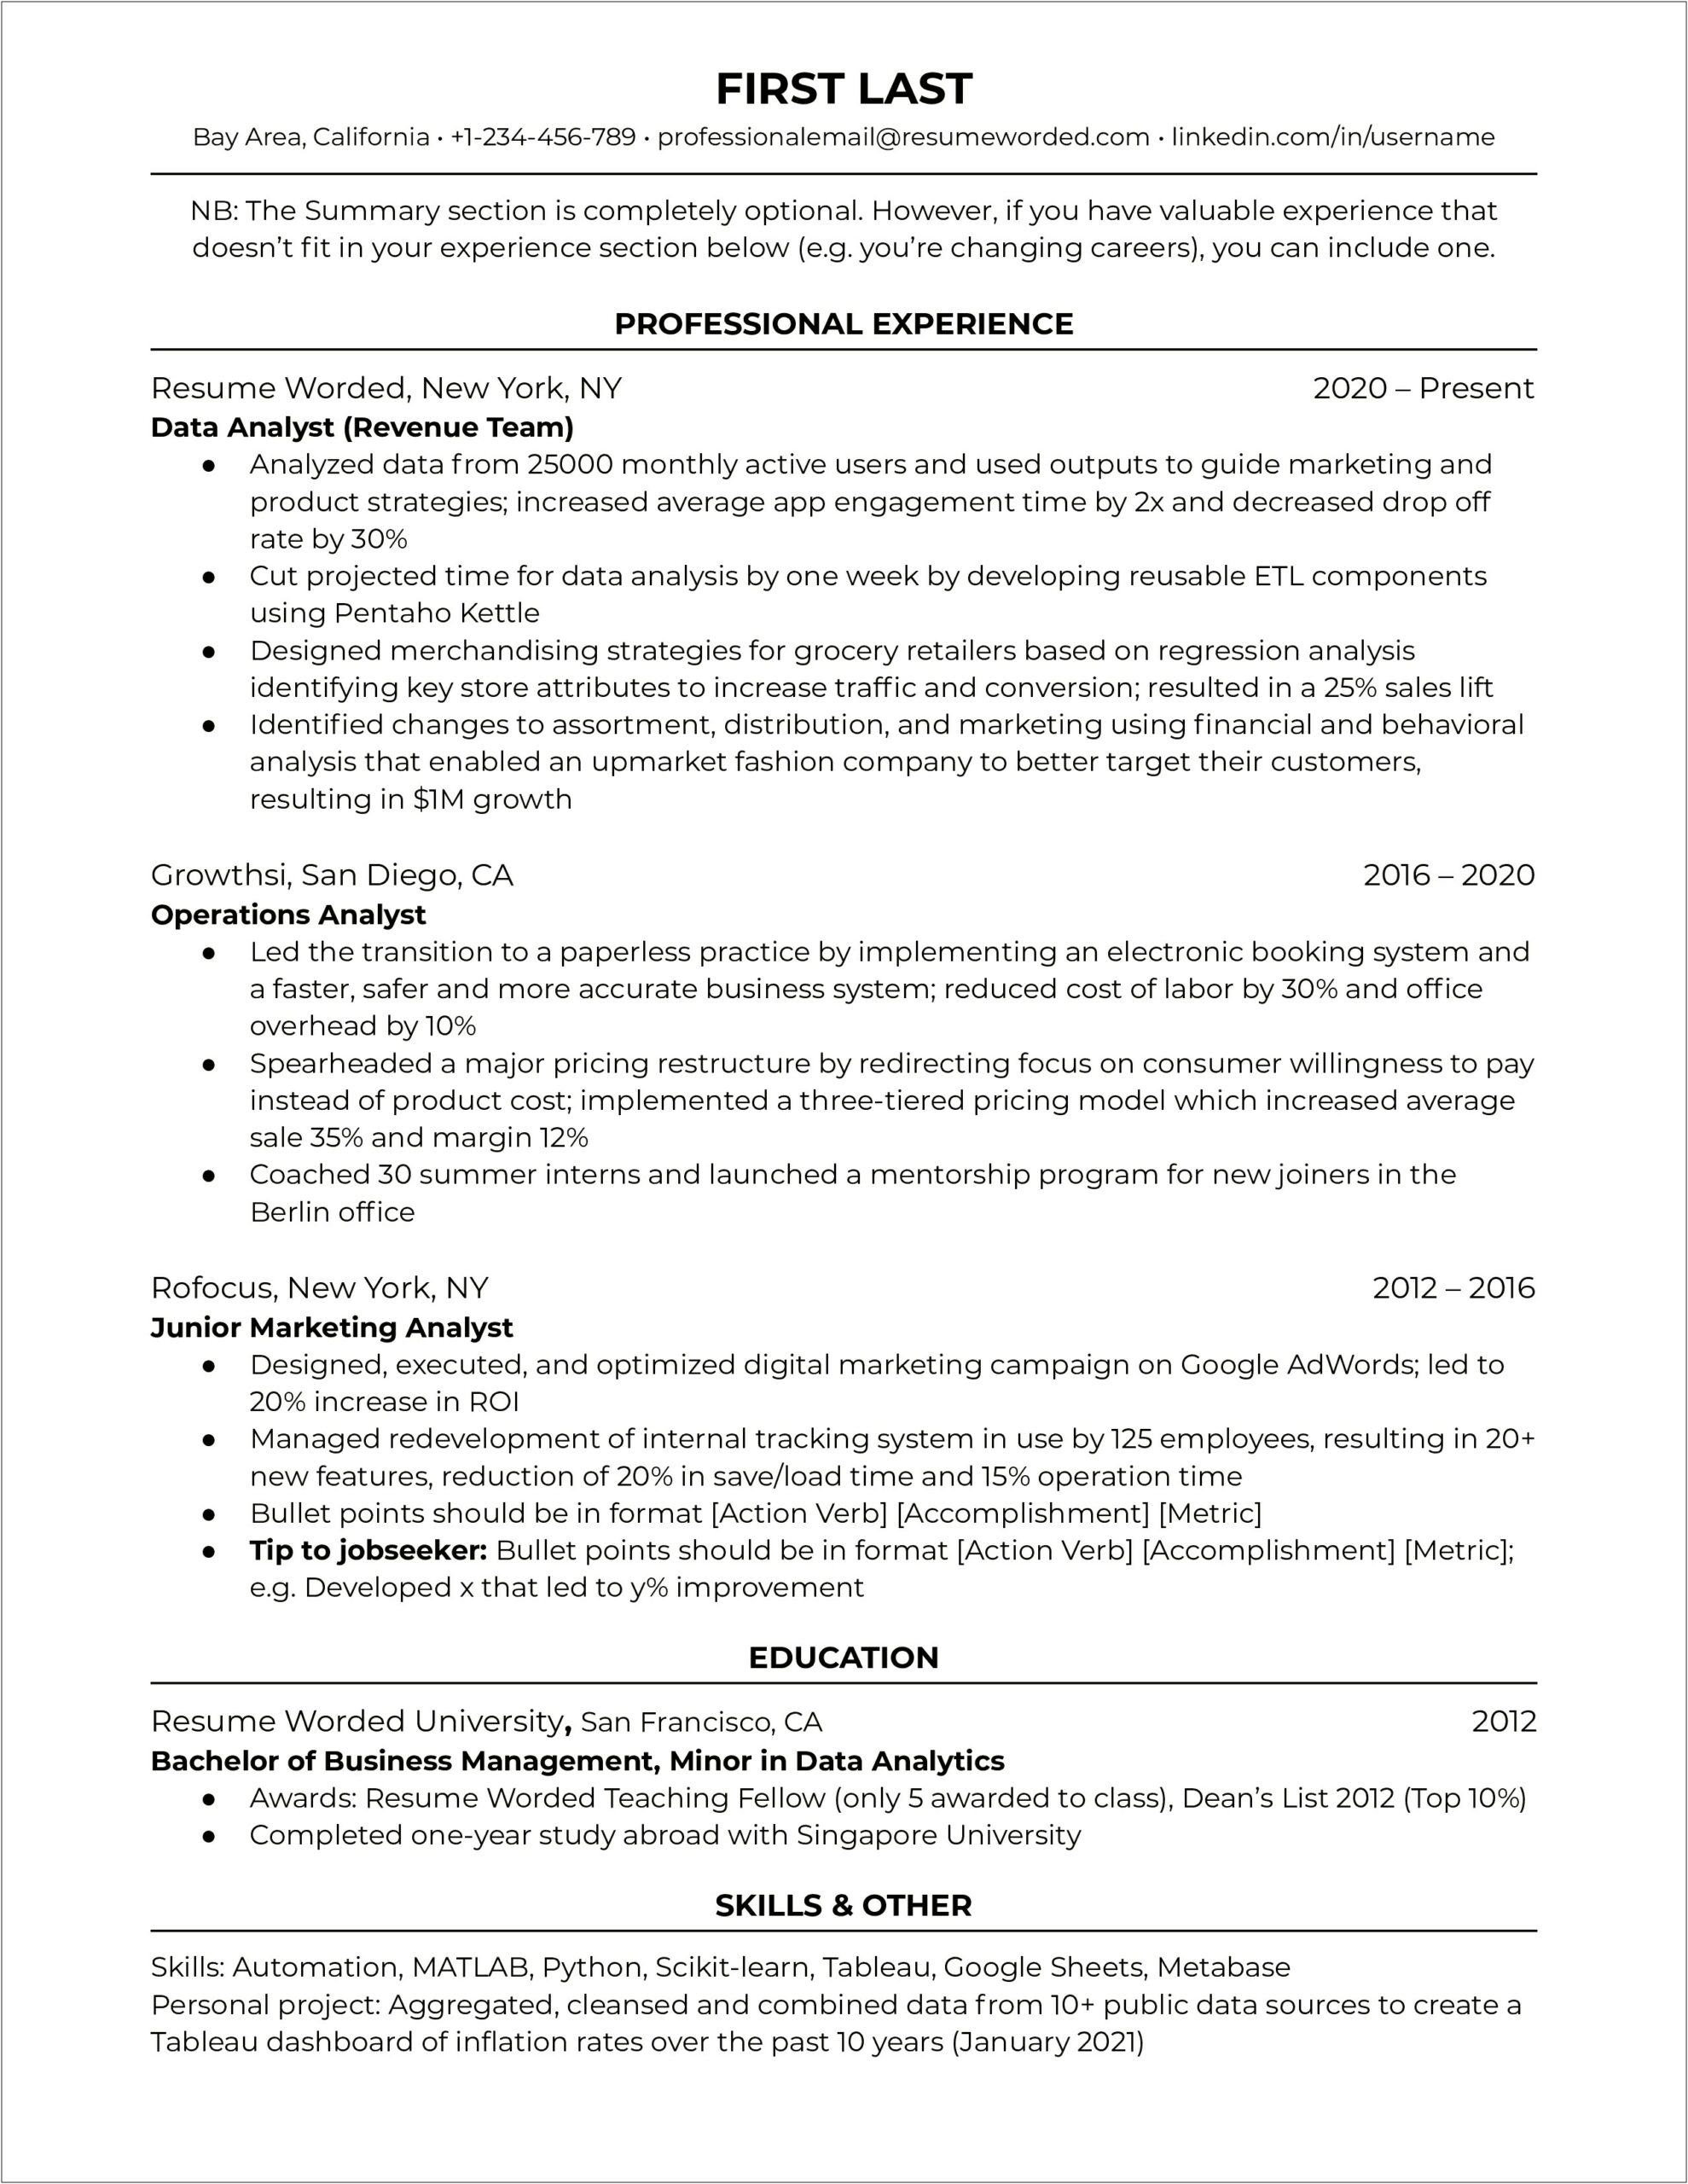 Entry Public Health Resume With Industry Experience